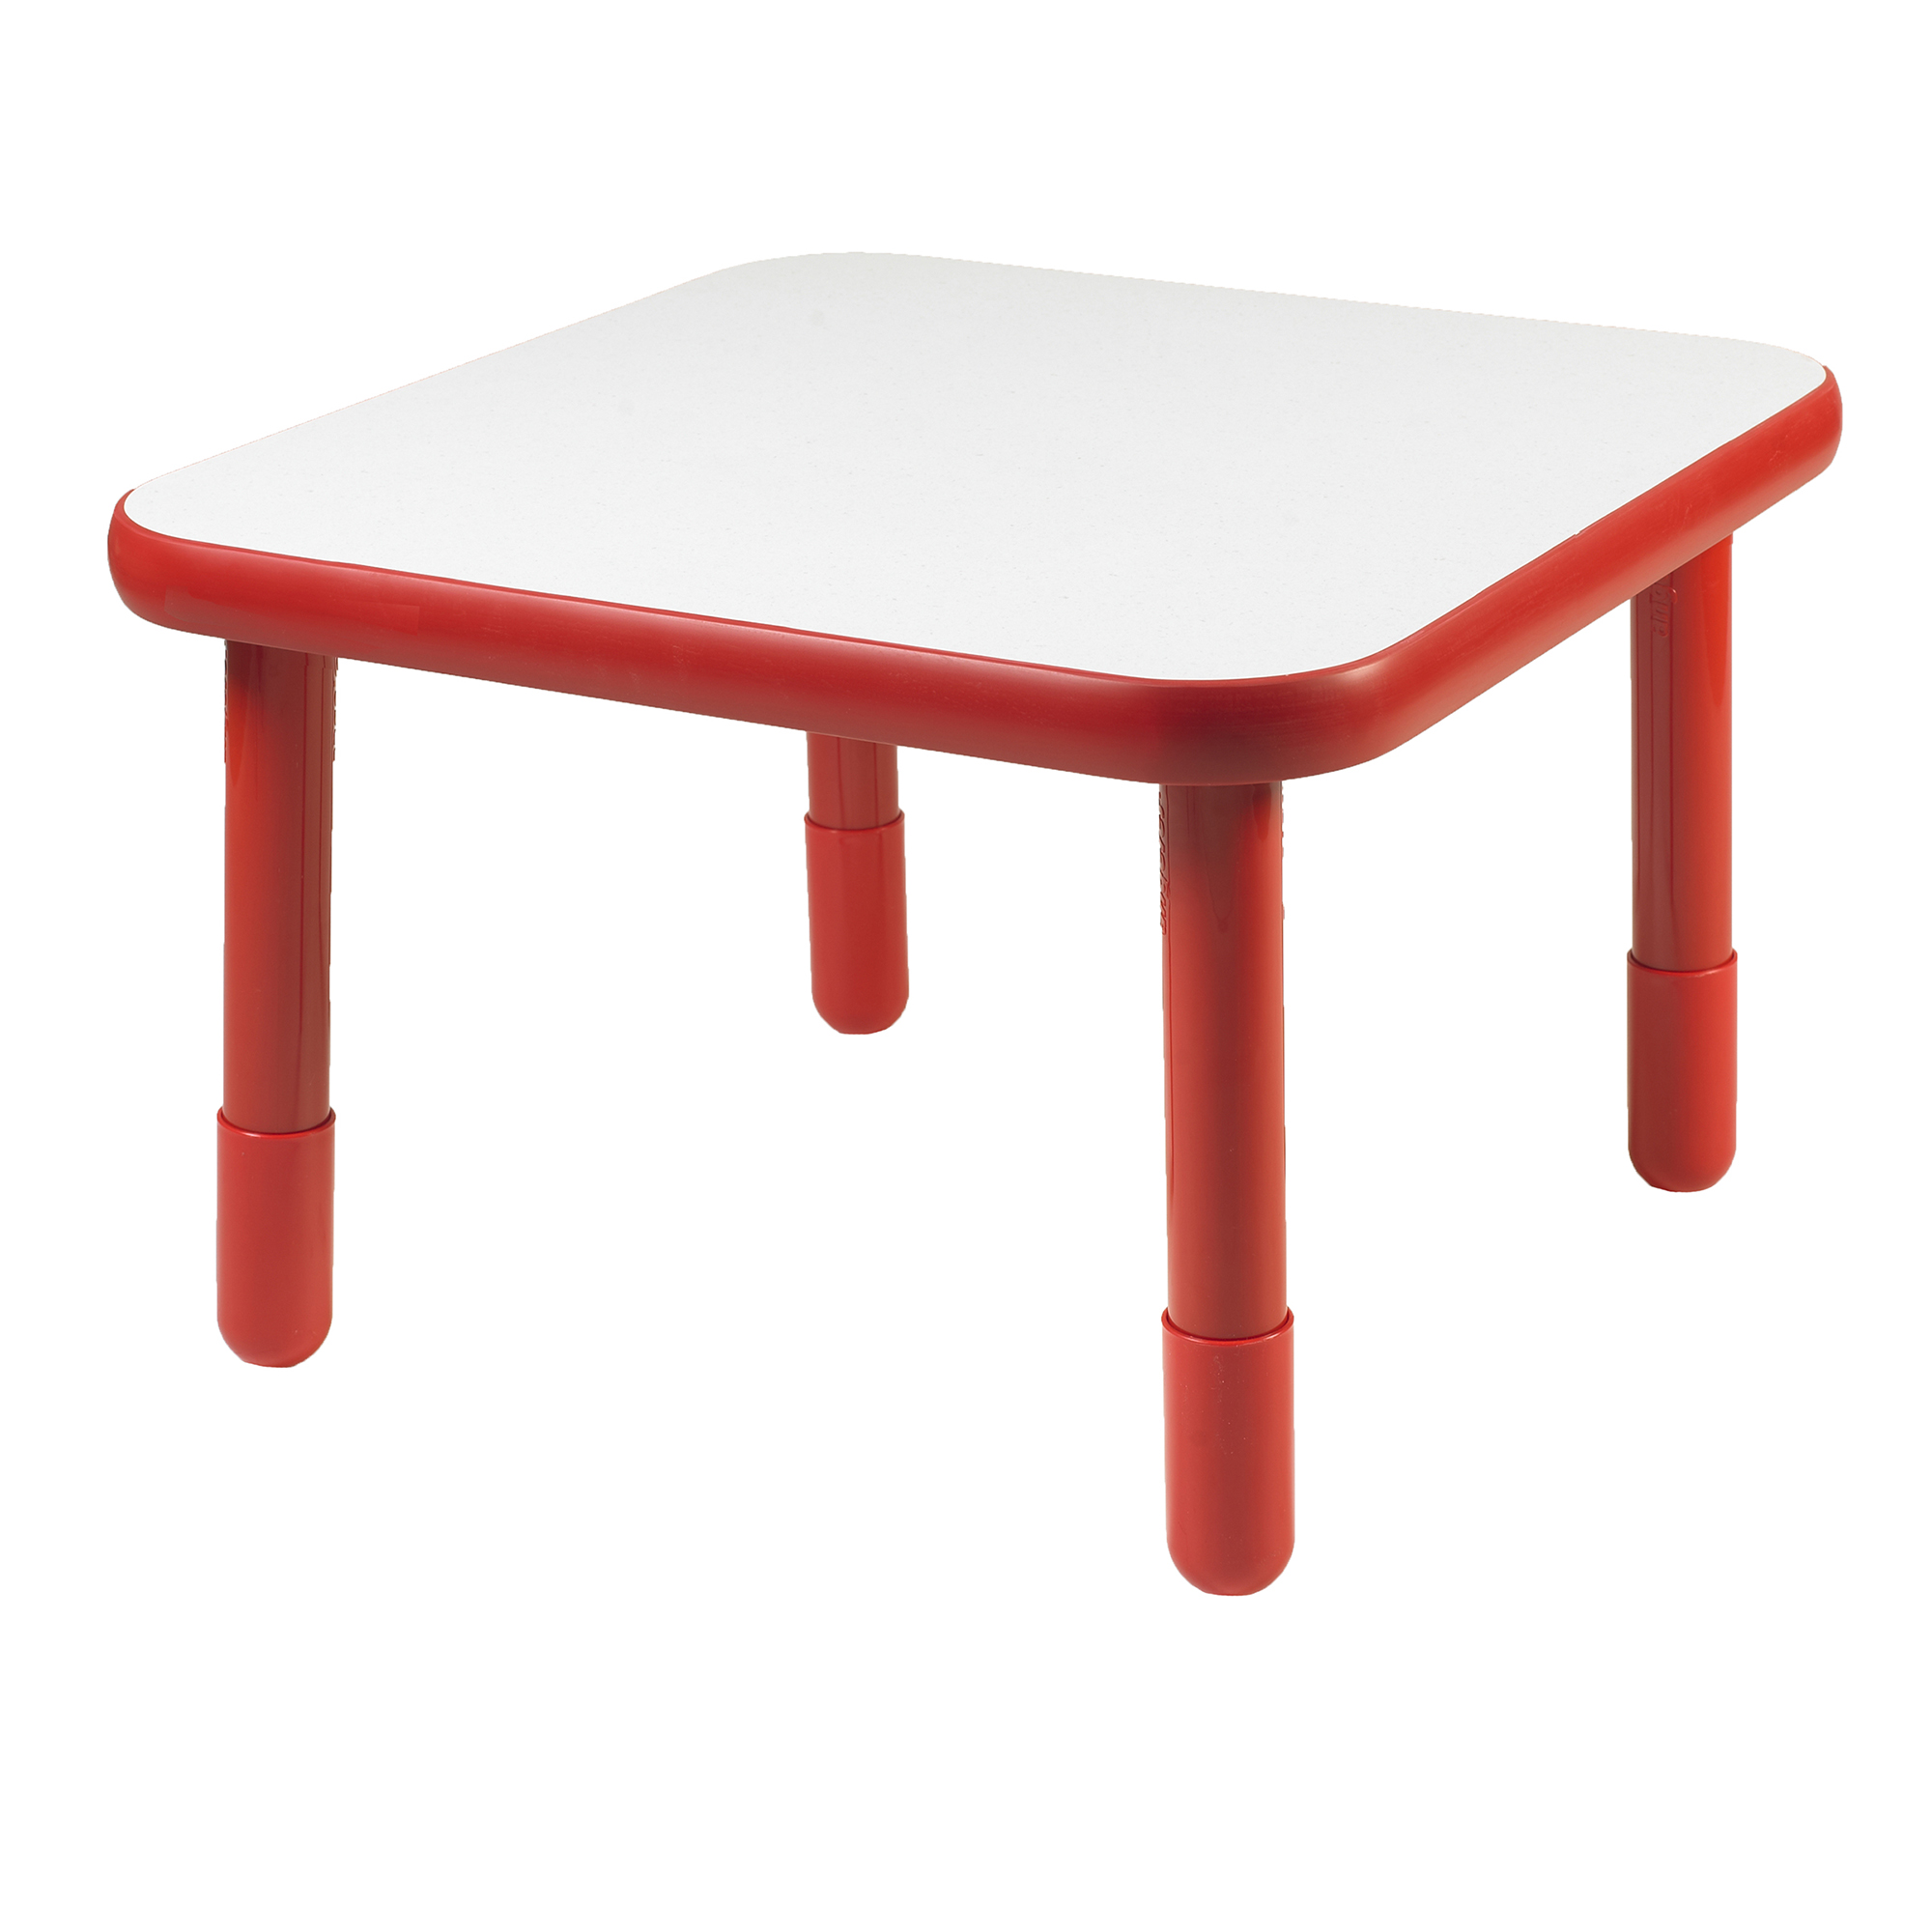 BaseLine® 76 cm  Square Table - Candy Apple Red with 51 cm  Legs